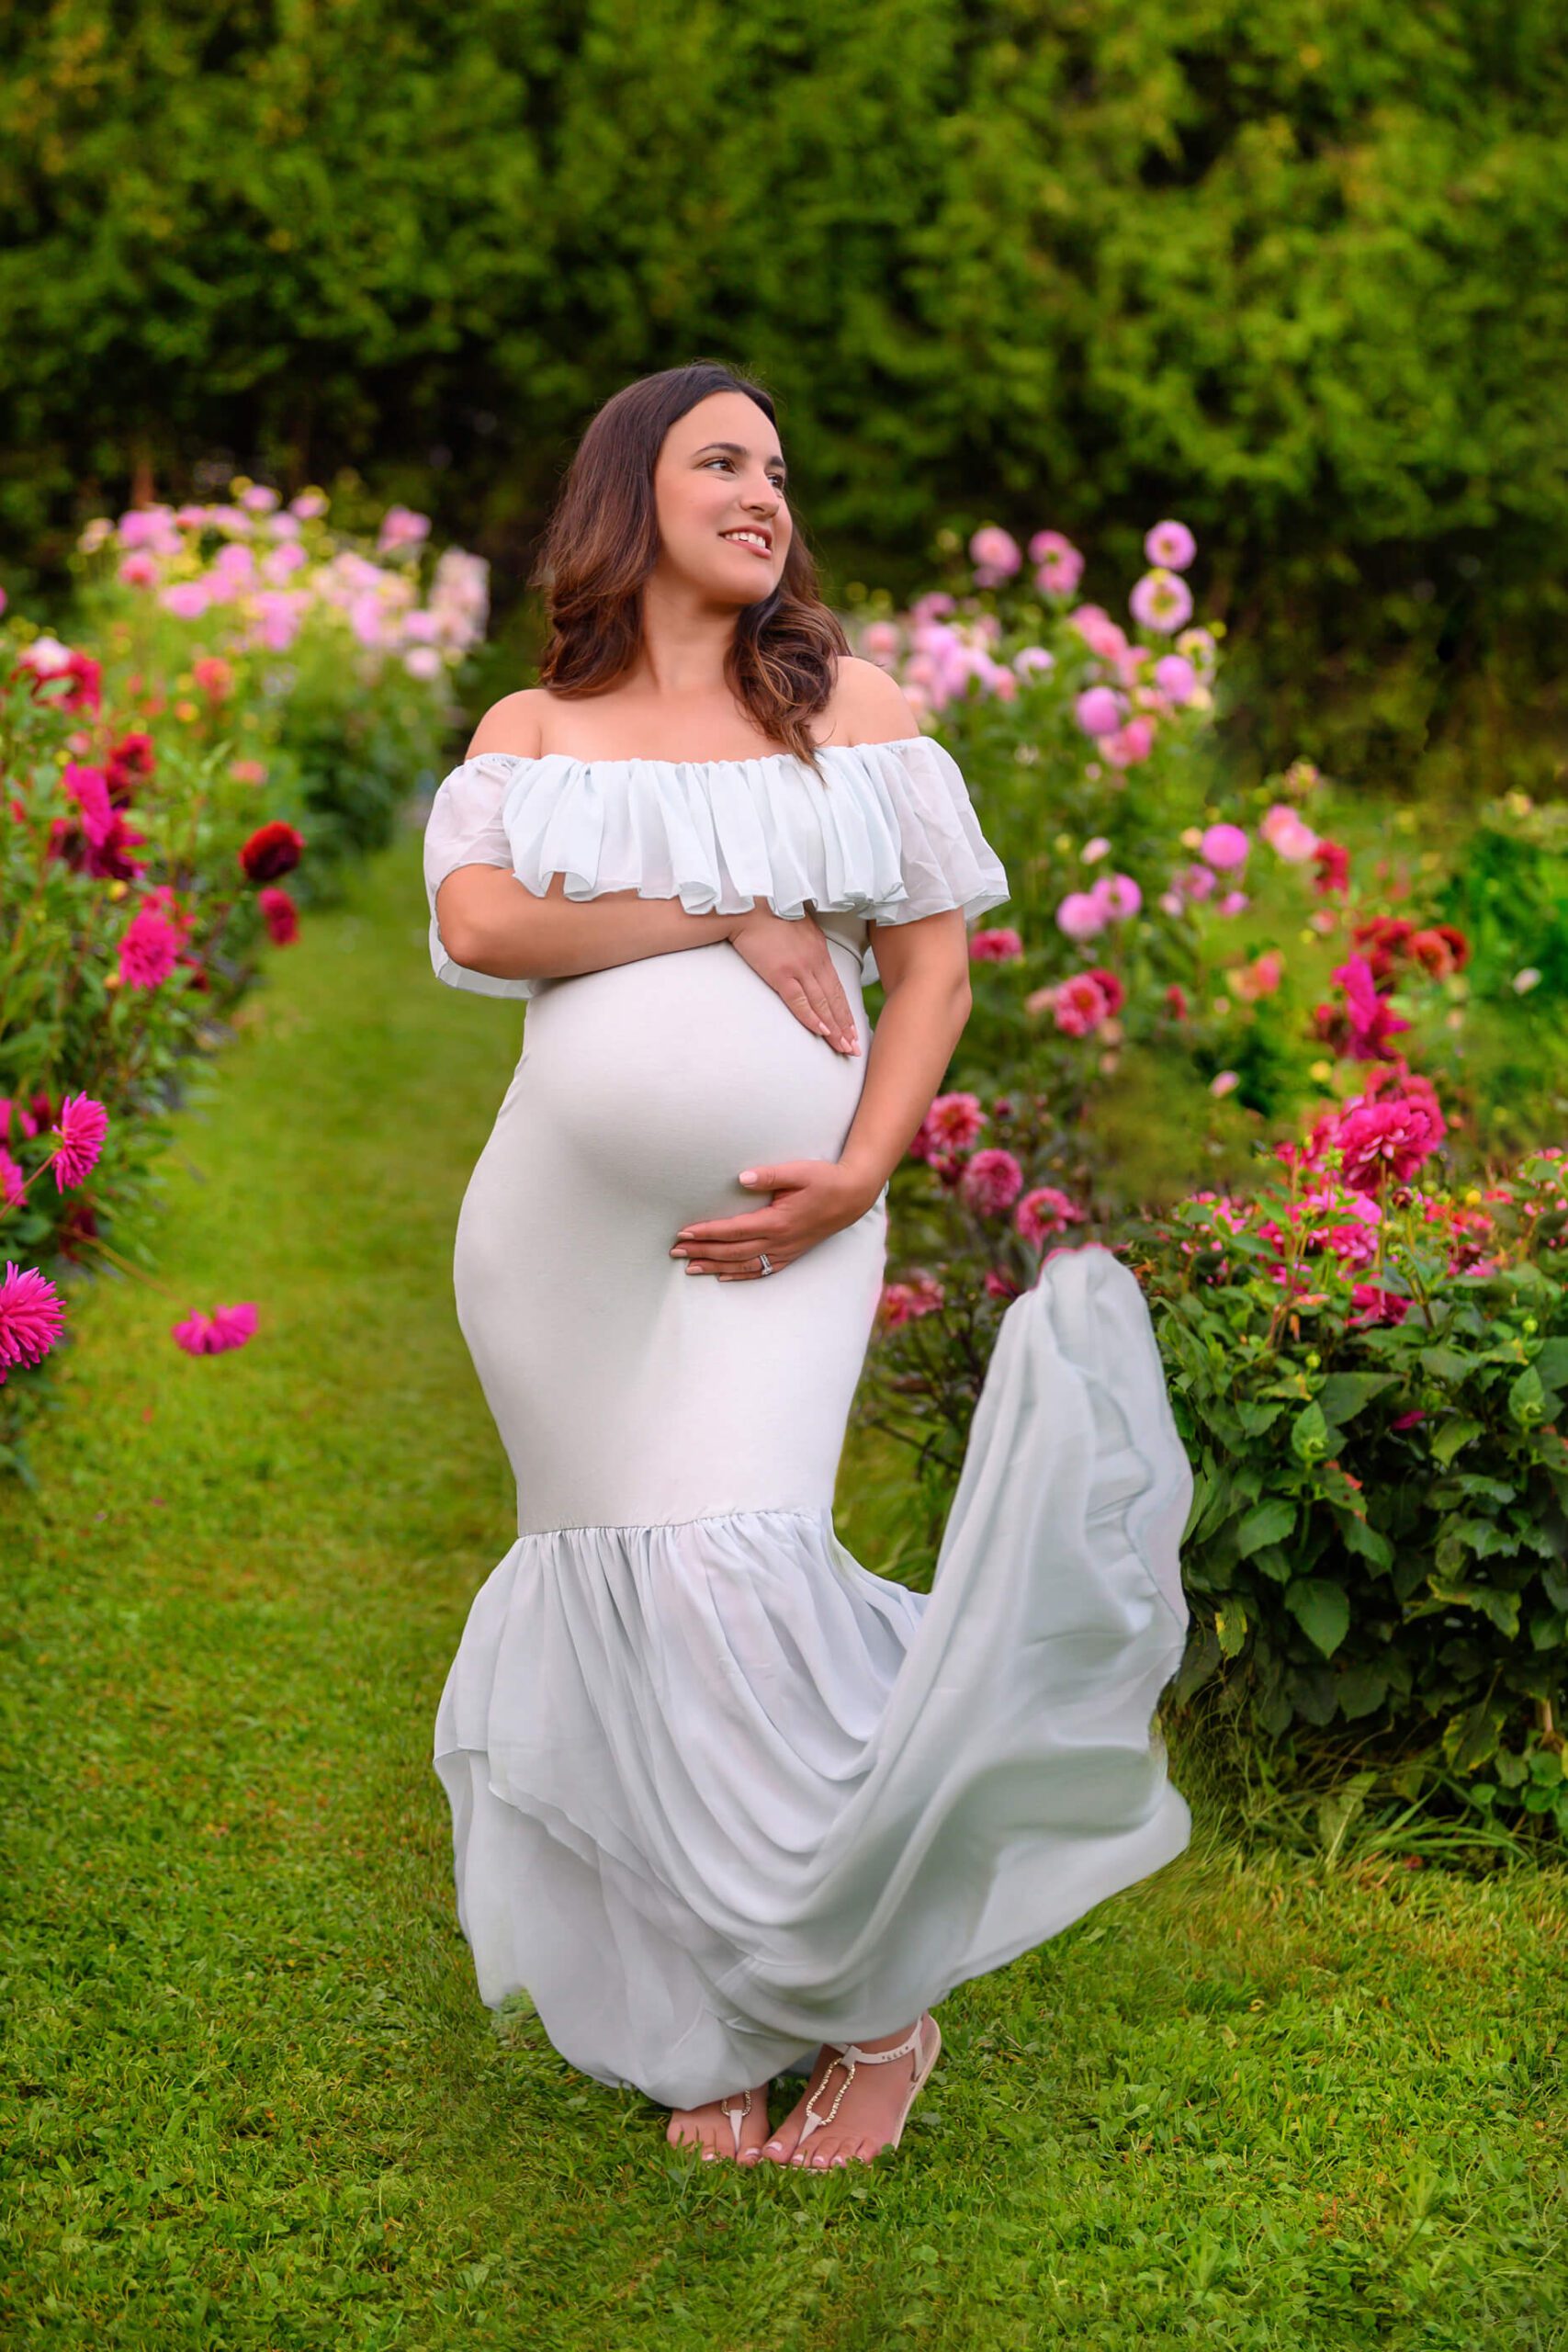 mom in mint green maternity dress smiling, dress flying up